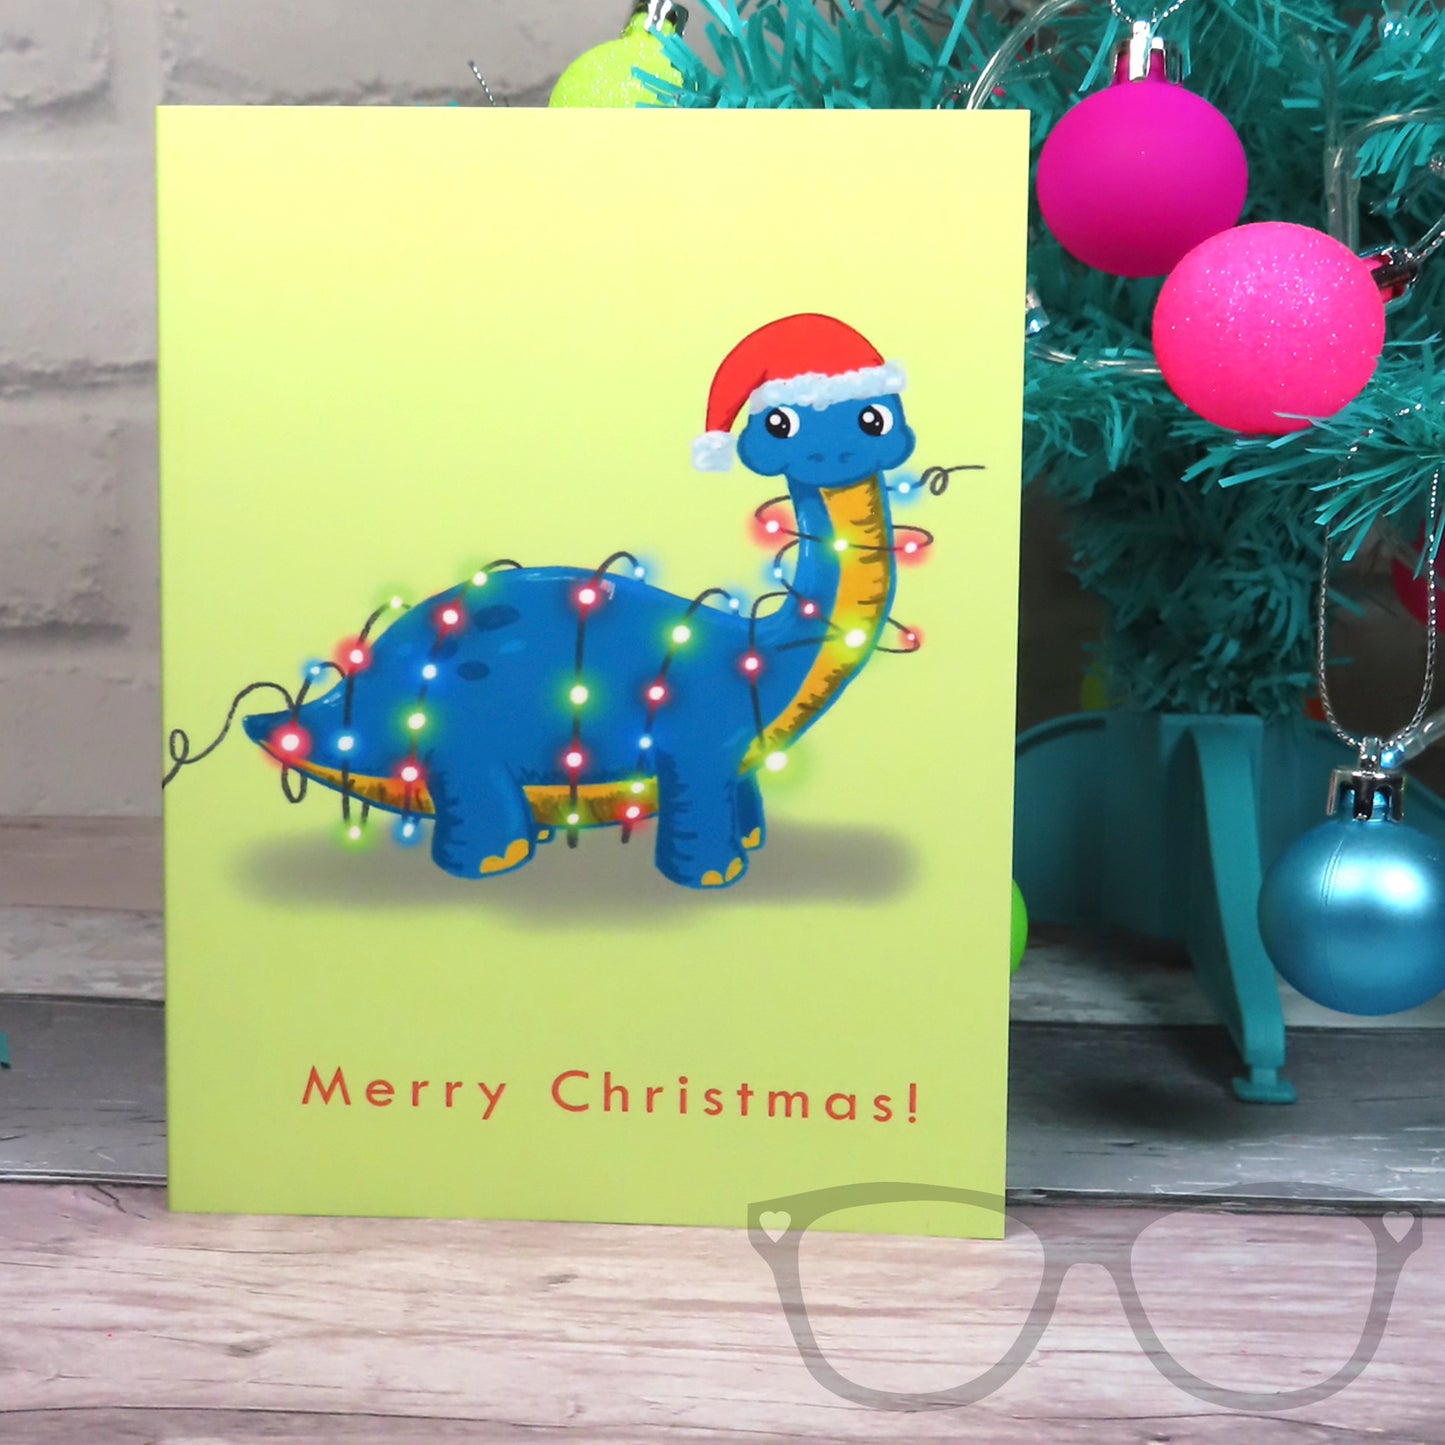 Brenda the Brachiousaurs is tangled up in fairy lights wearing a festive hat. A cute design on a christmas greetings card